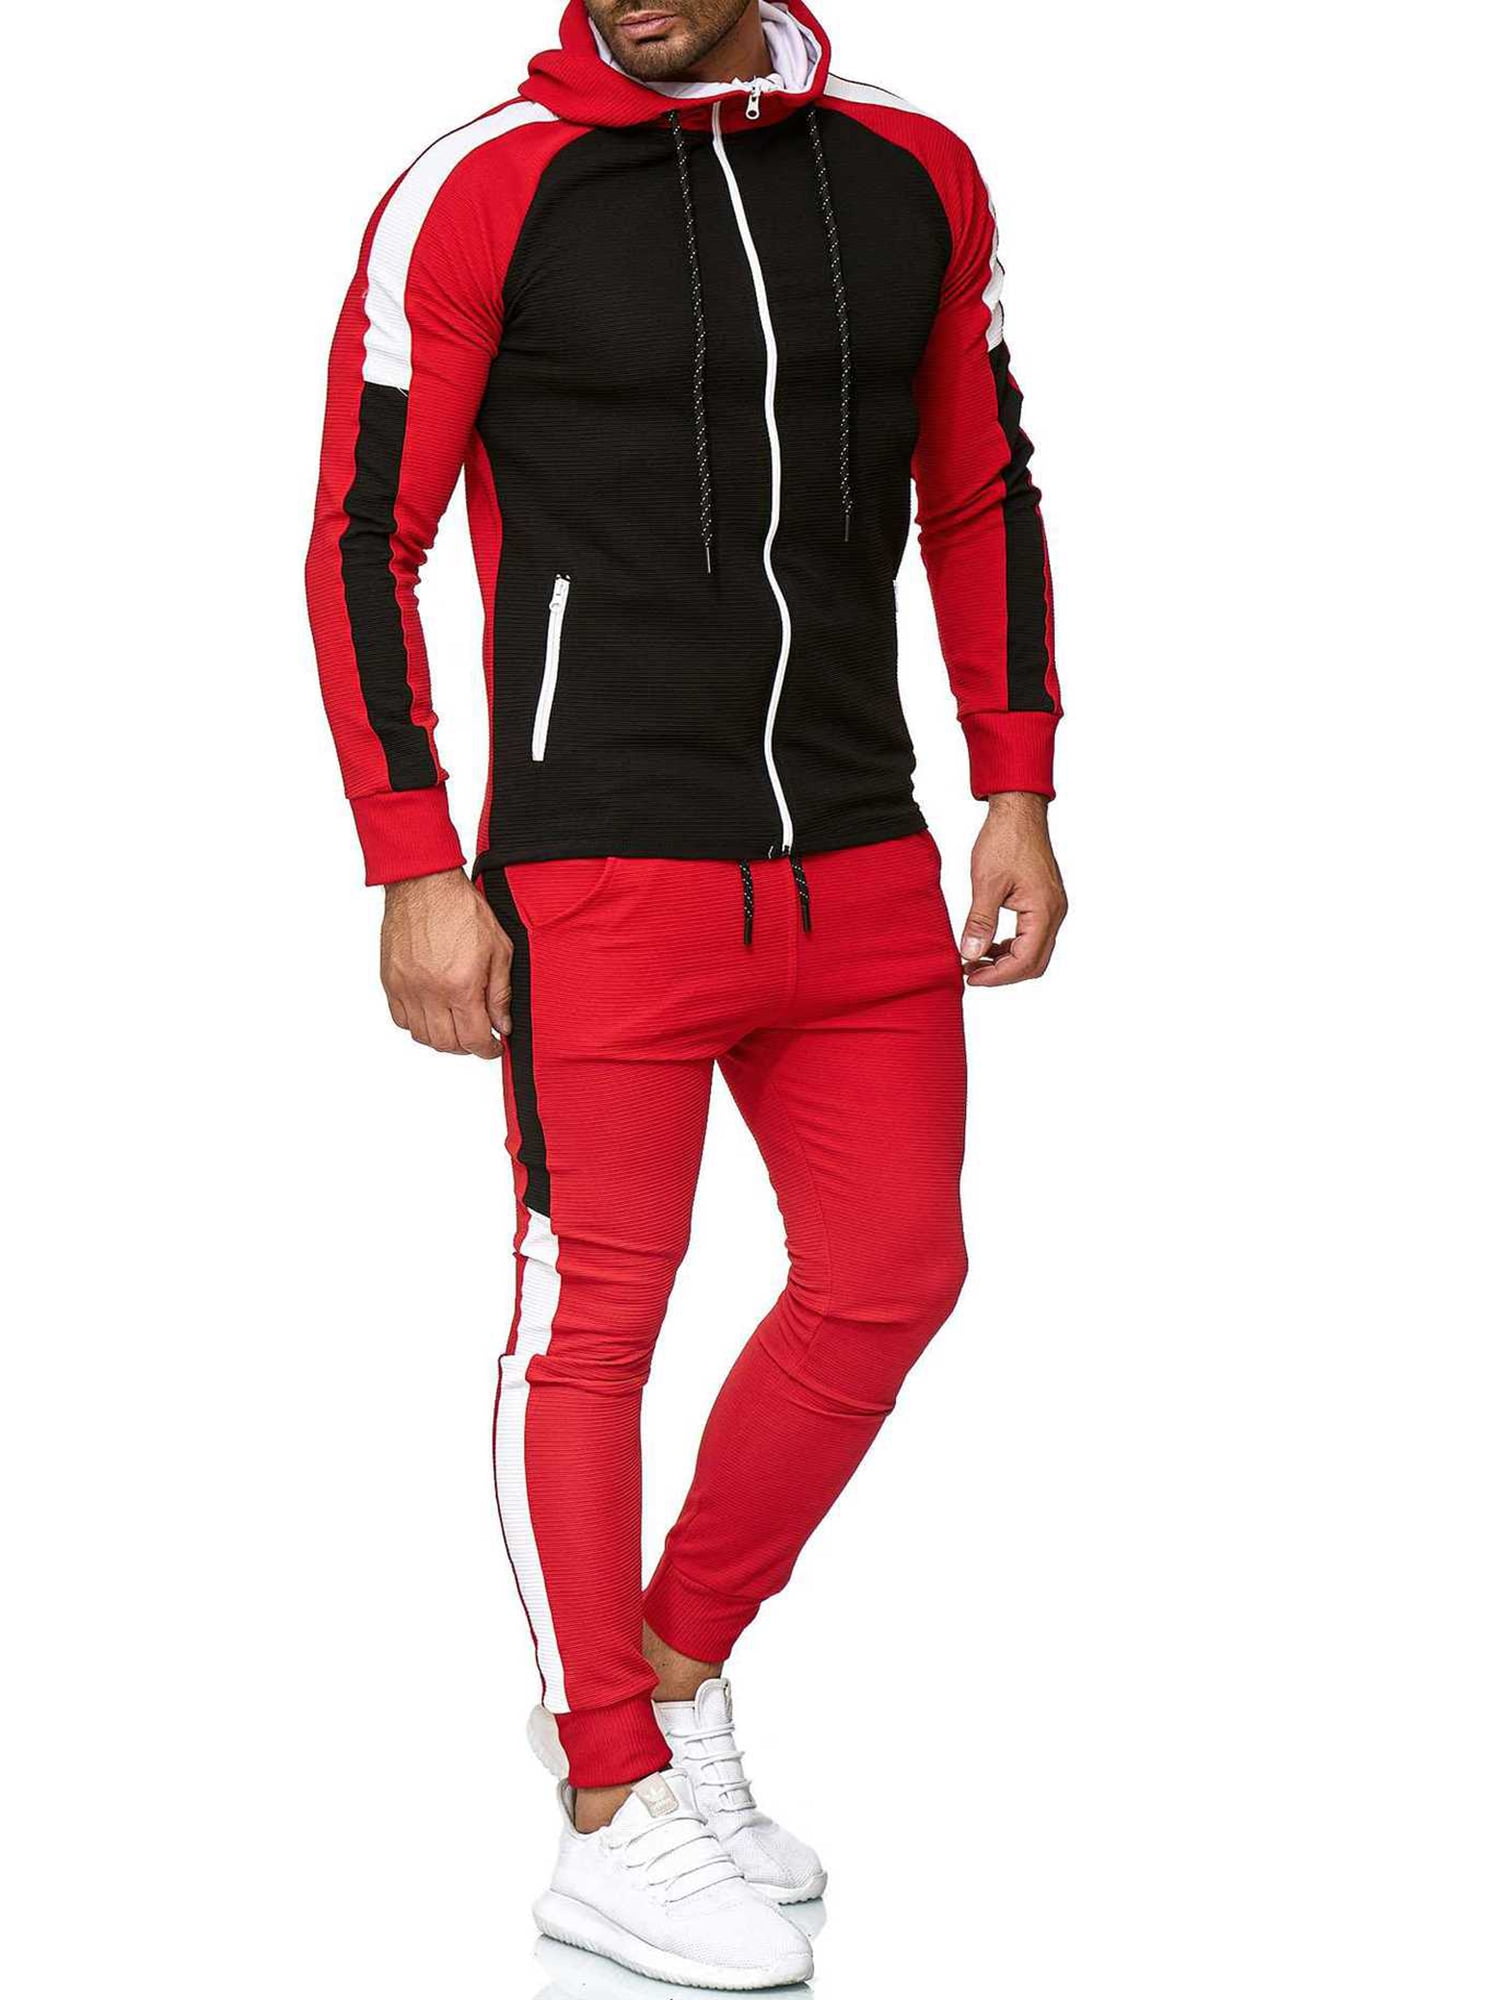 Mens 2 Pieces Patchwork Outfit Set Long Sleeve Full Zip Hooded Pullover Sweater and Long Pants Set Gym Tracksuit Running Set Hip Hop Sports Clothing Set